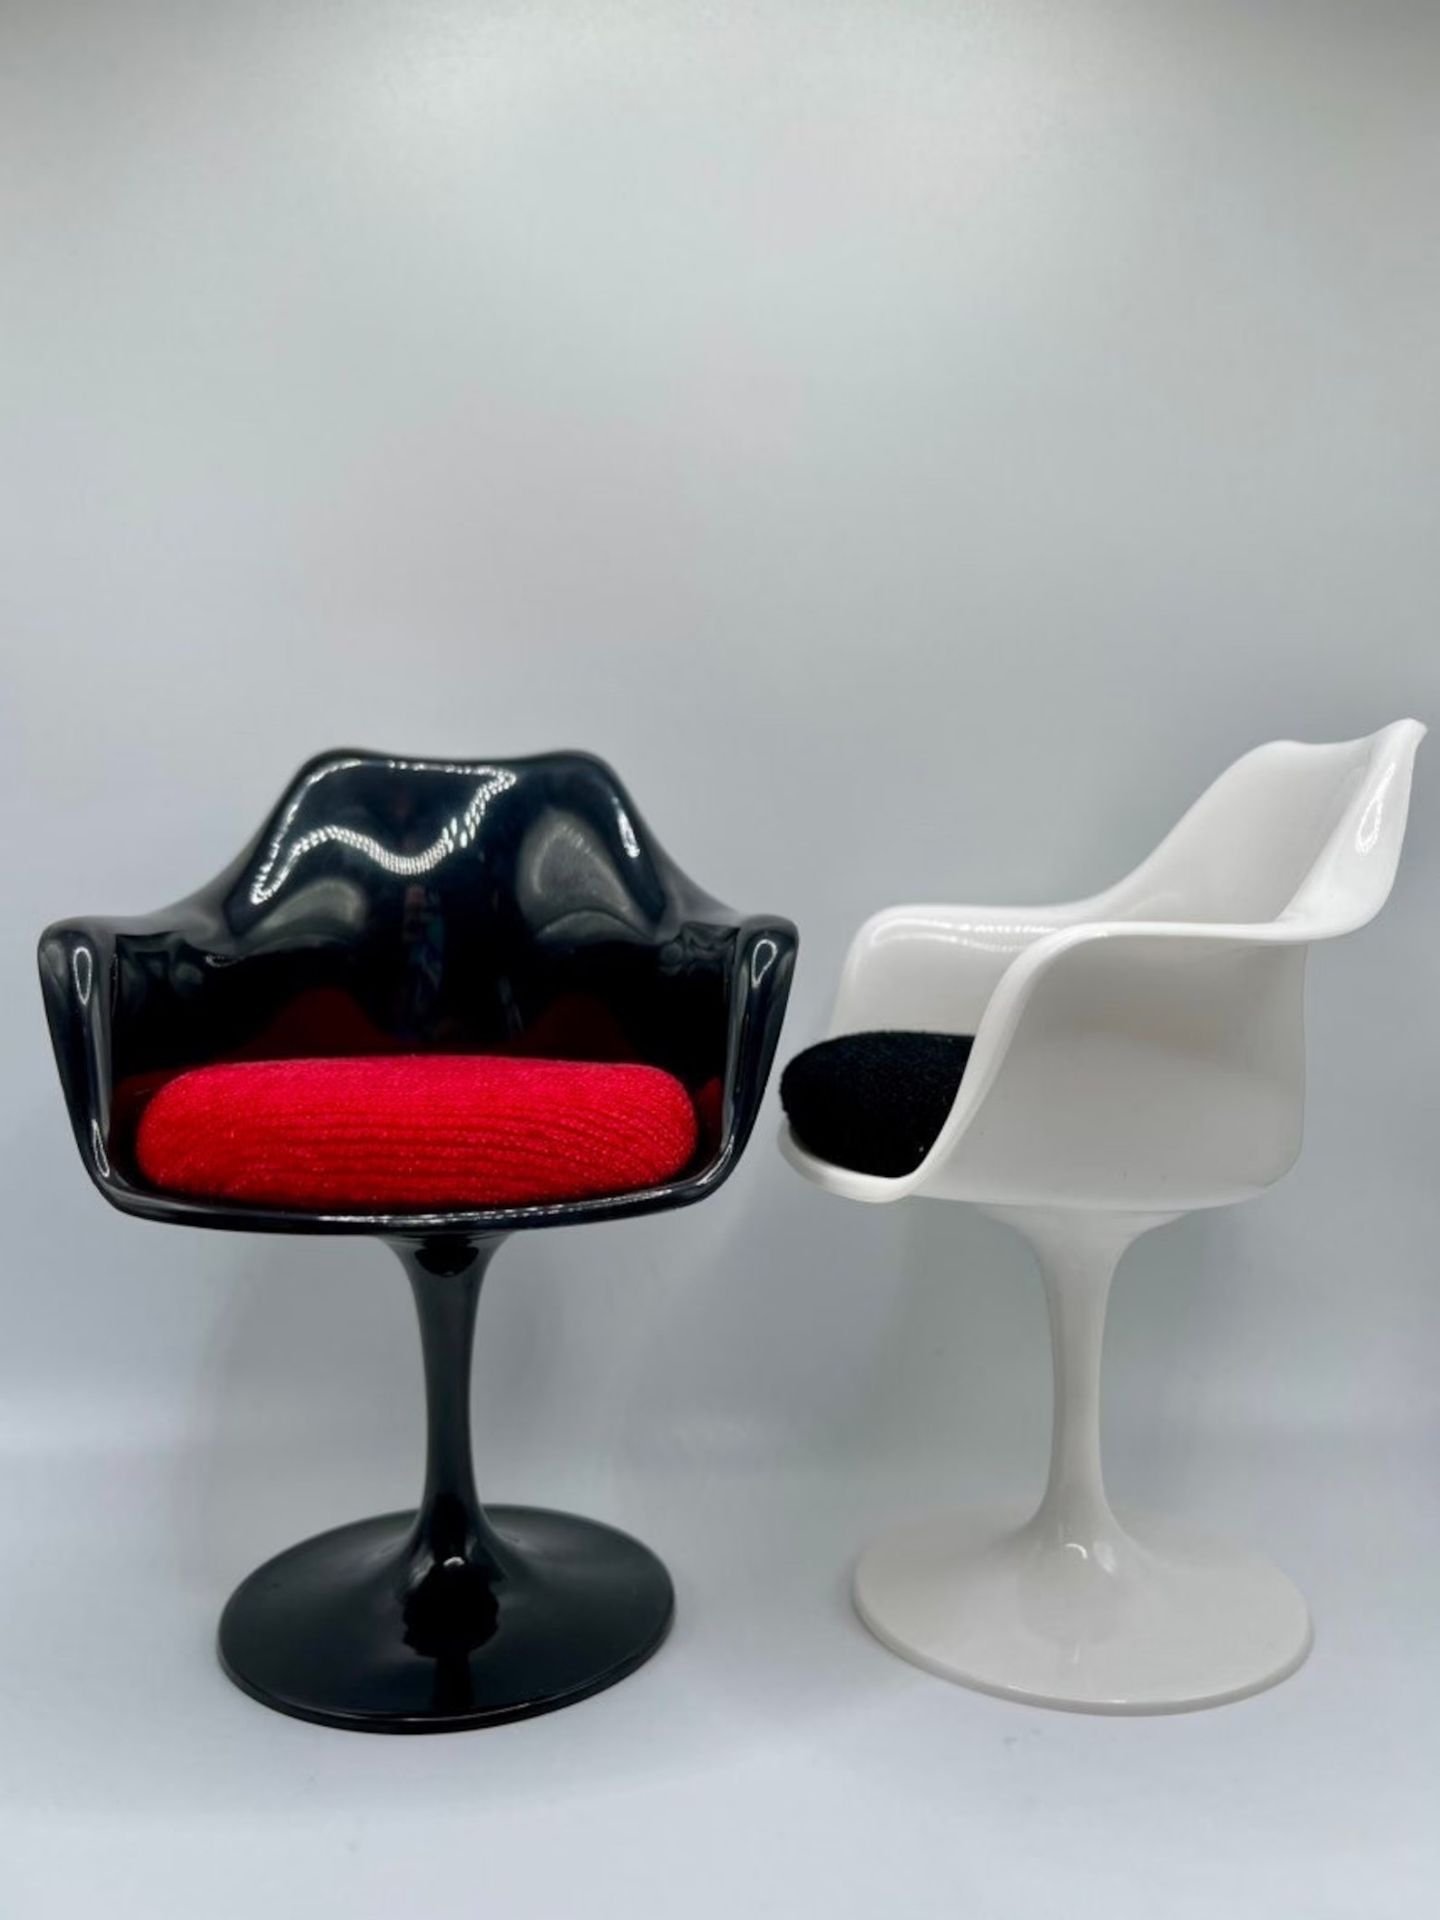 Pair of Tulip Chairs, 1/6 Scale Desk Display